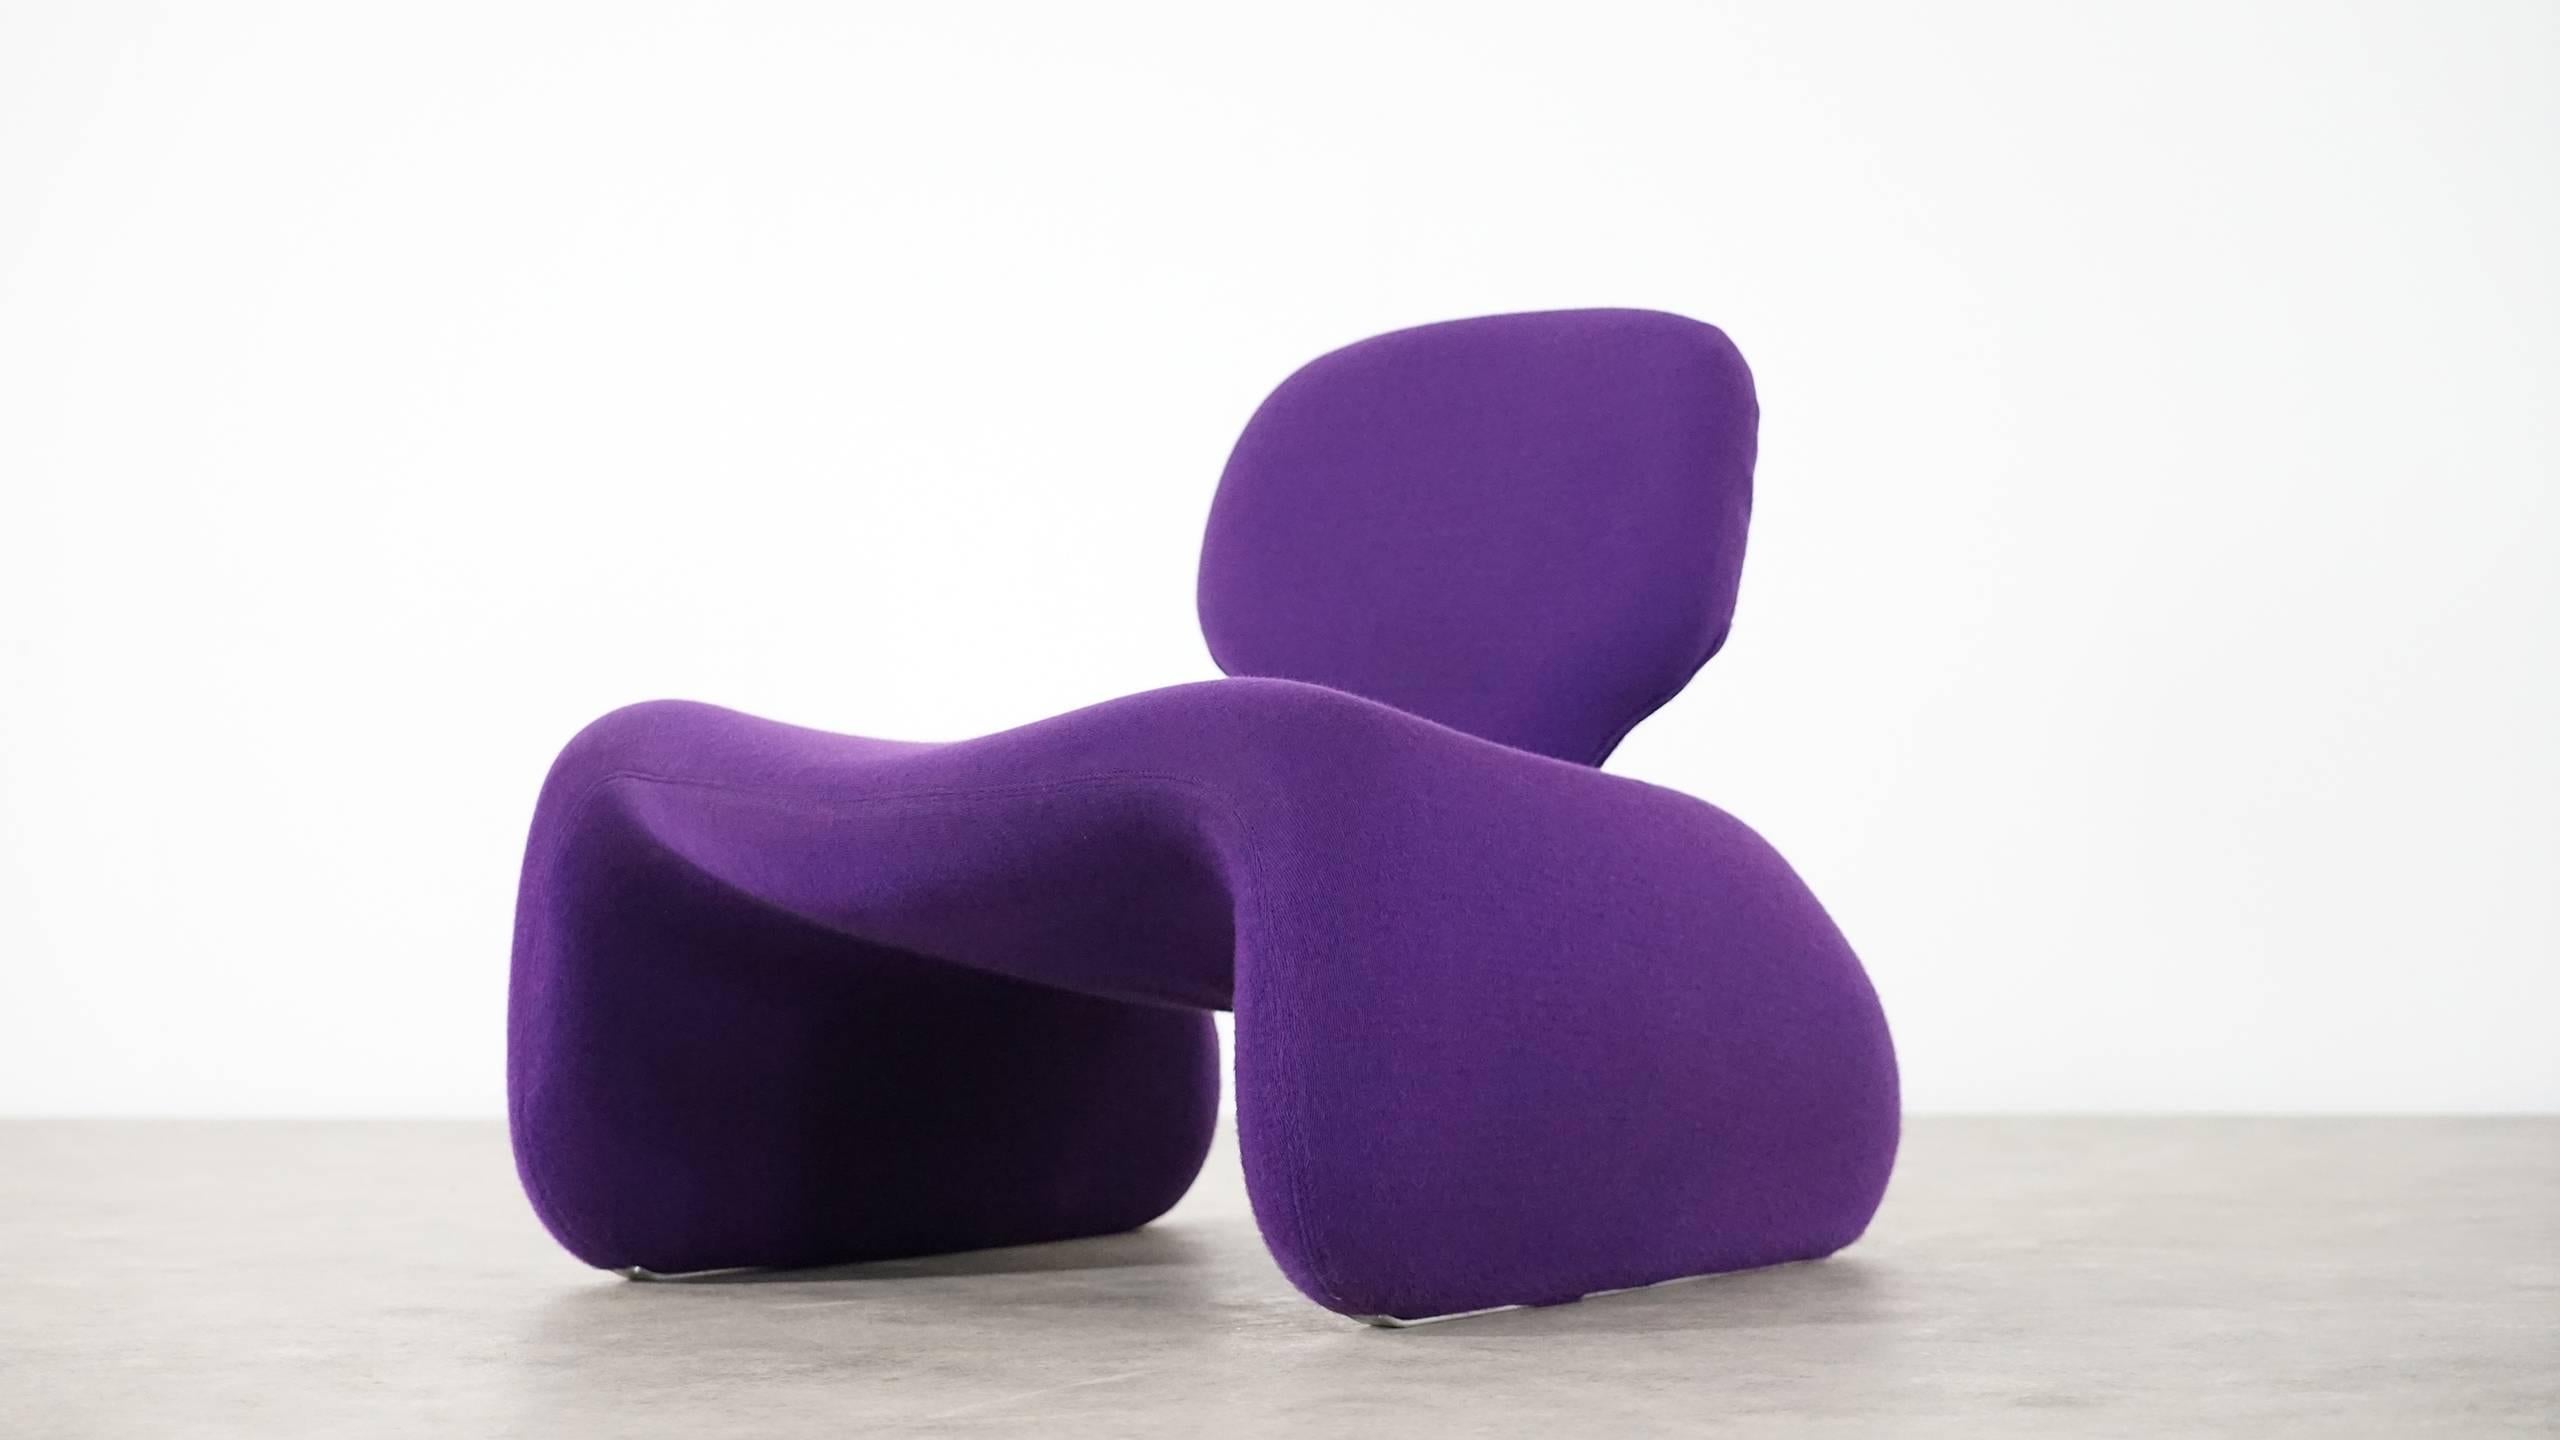 Pair of 1965 Djinn chairs by Olivier Morgue in violet original upholstery!
Great condition, the foam is perfect.

Airborne International, France, 1965. Wool upholstery over foam and internal steel frame. 
Very popular because was featured in